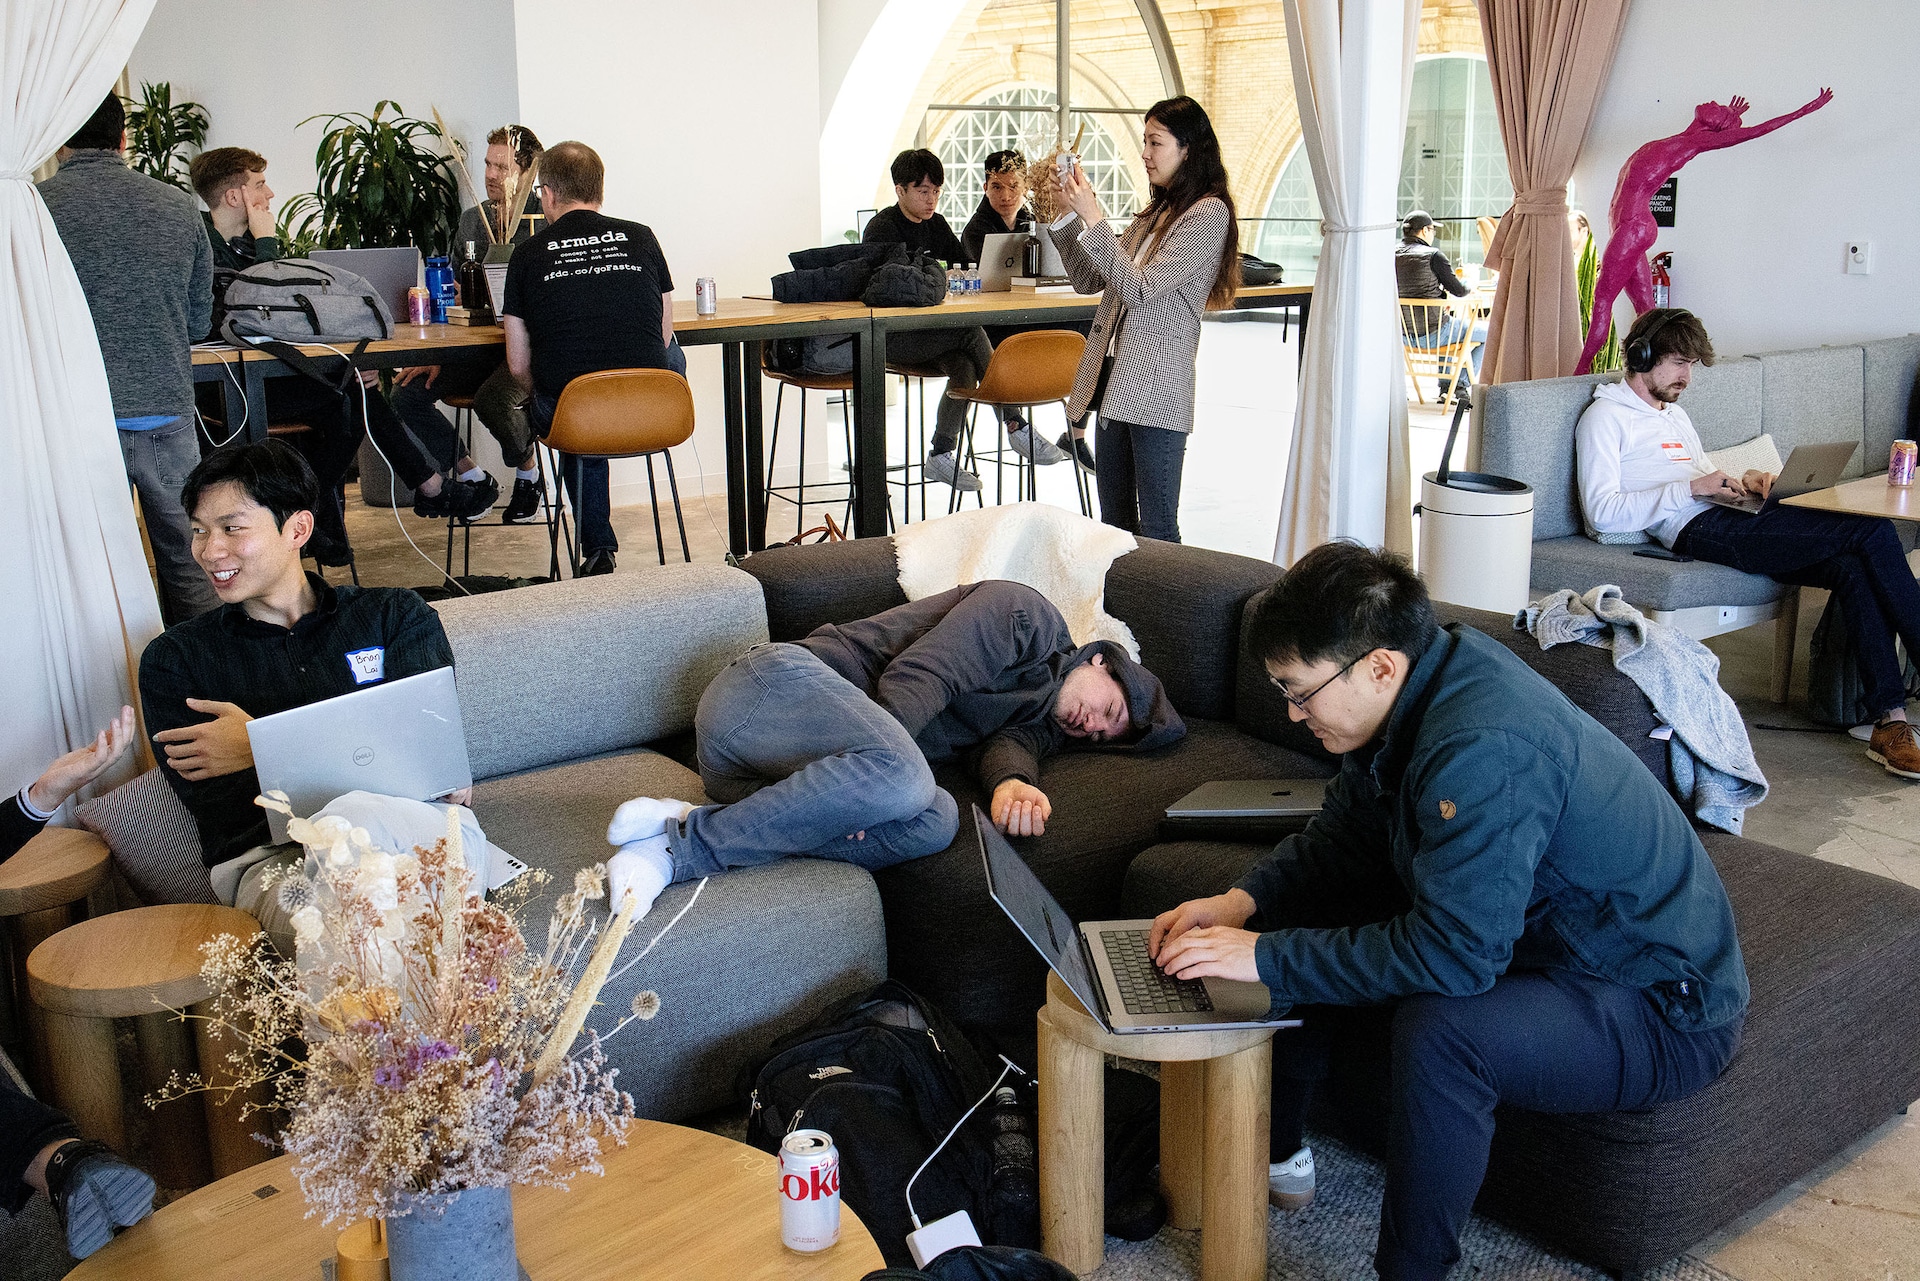 EXTRA: The goal was to use AI to devise solutions to human challenges. // Participants in the “AI For Good” Hackathon work on their laptops as well as take a break to rest during the event at the co-working space Shack15 in the Ferry Building in San Francisco, California on March 25, 2023. The hackathon, organized by Cerebral Valley and Internet Activism, featured 24 hours of coding to build projects, followed by demos. Cerebral Valley is an organization that sprung up to help organize a community around the many people moving to San Francisco to work in AI. They plan co-working days, hackathons, networking meet-ups and other events.